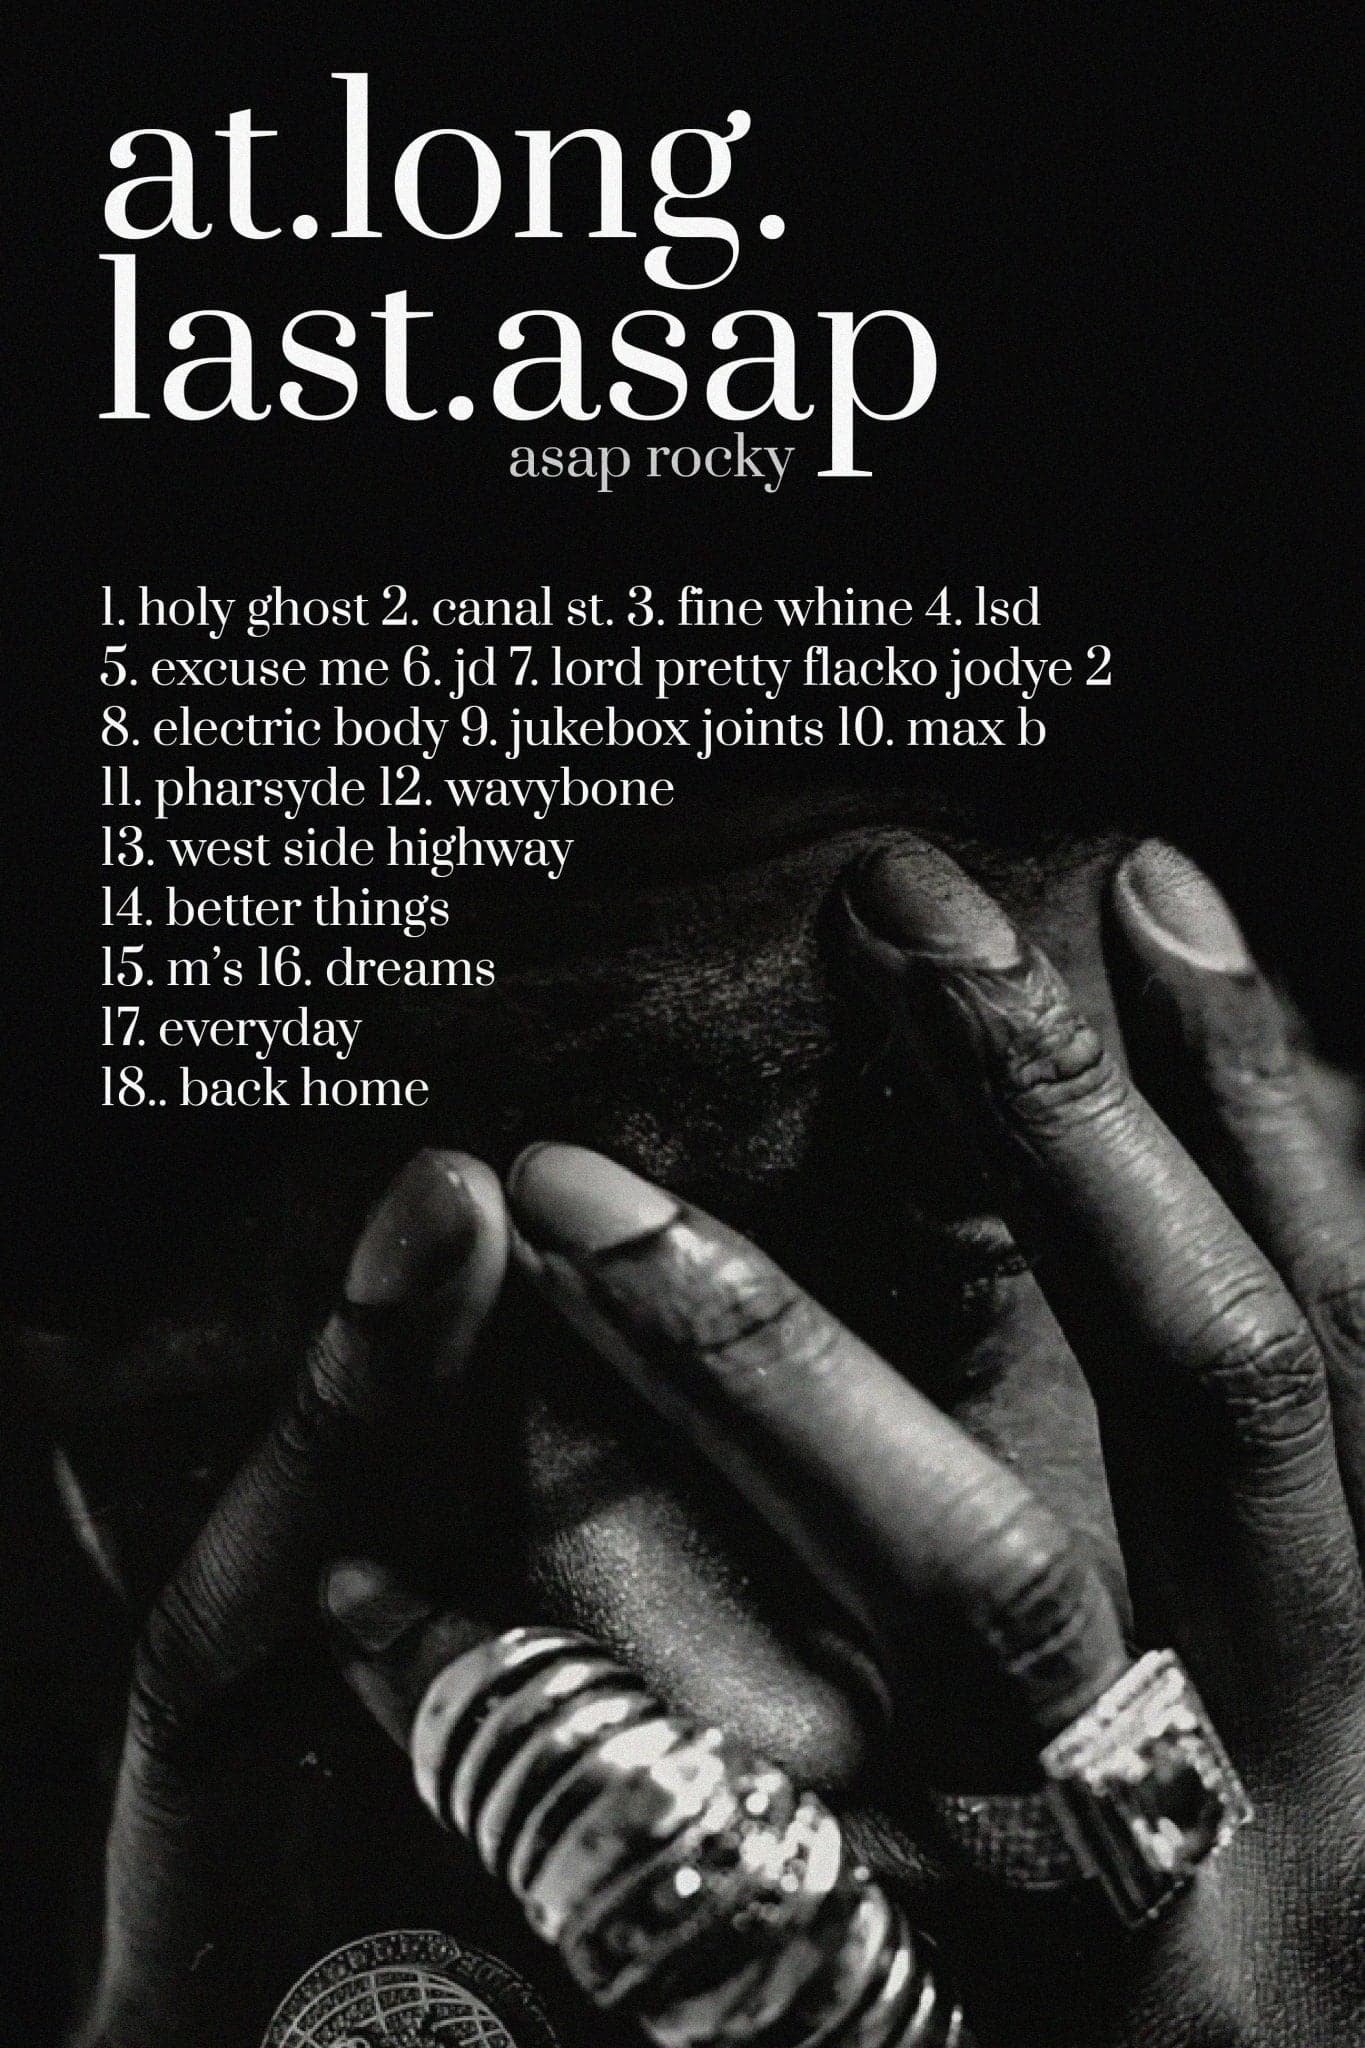 A$AP Rocky '90s AT.Long.LAST.A$AP. Tracklist' Poster - Posters Plug